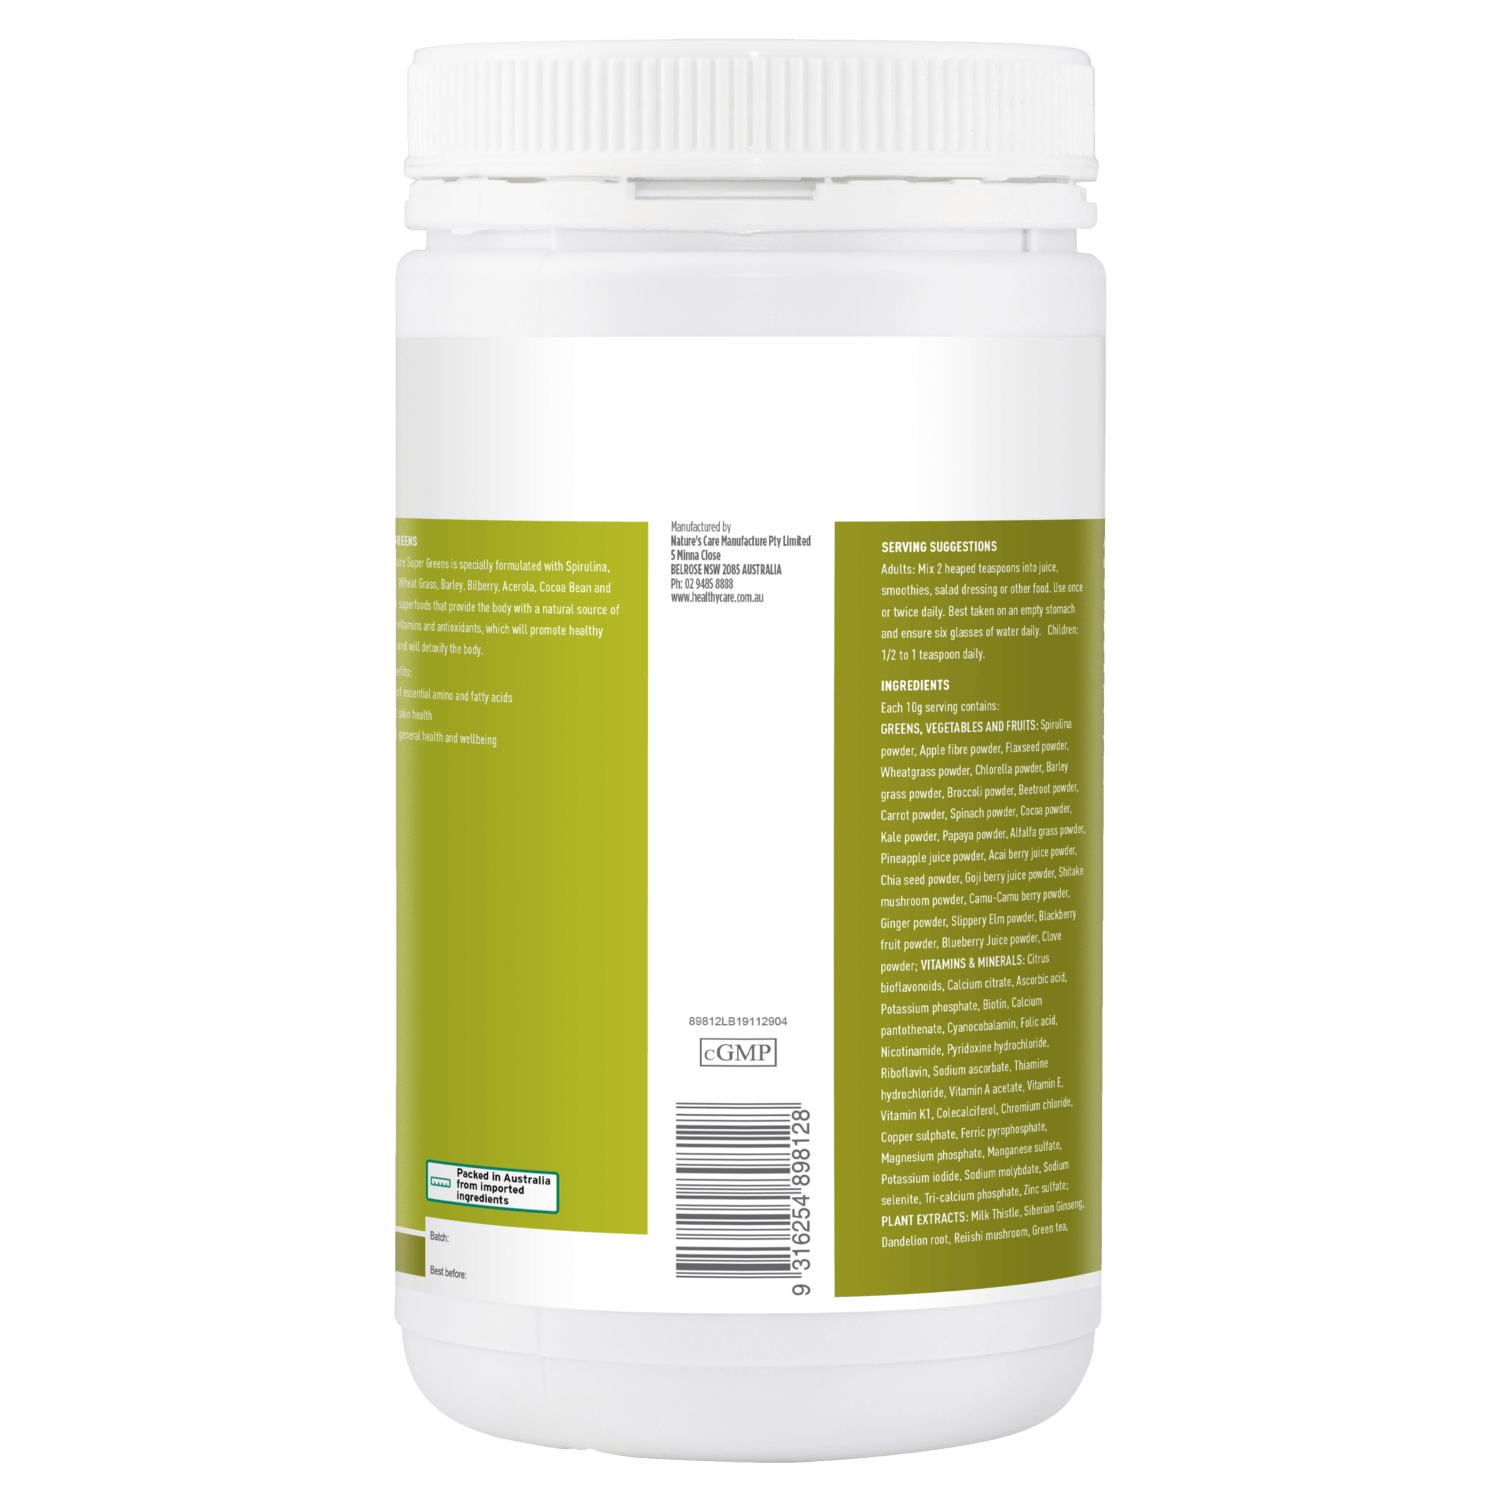 Manufacturer and Barcode of Super Greens 600g Powder-Vitamins & Supplements-Healthy Care Australia